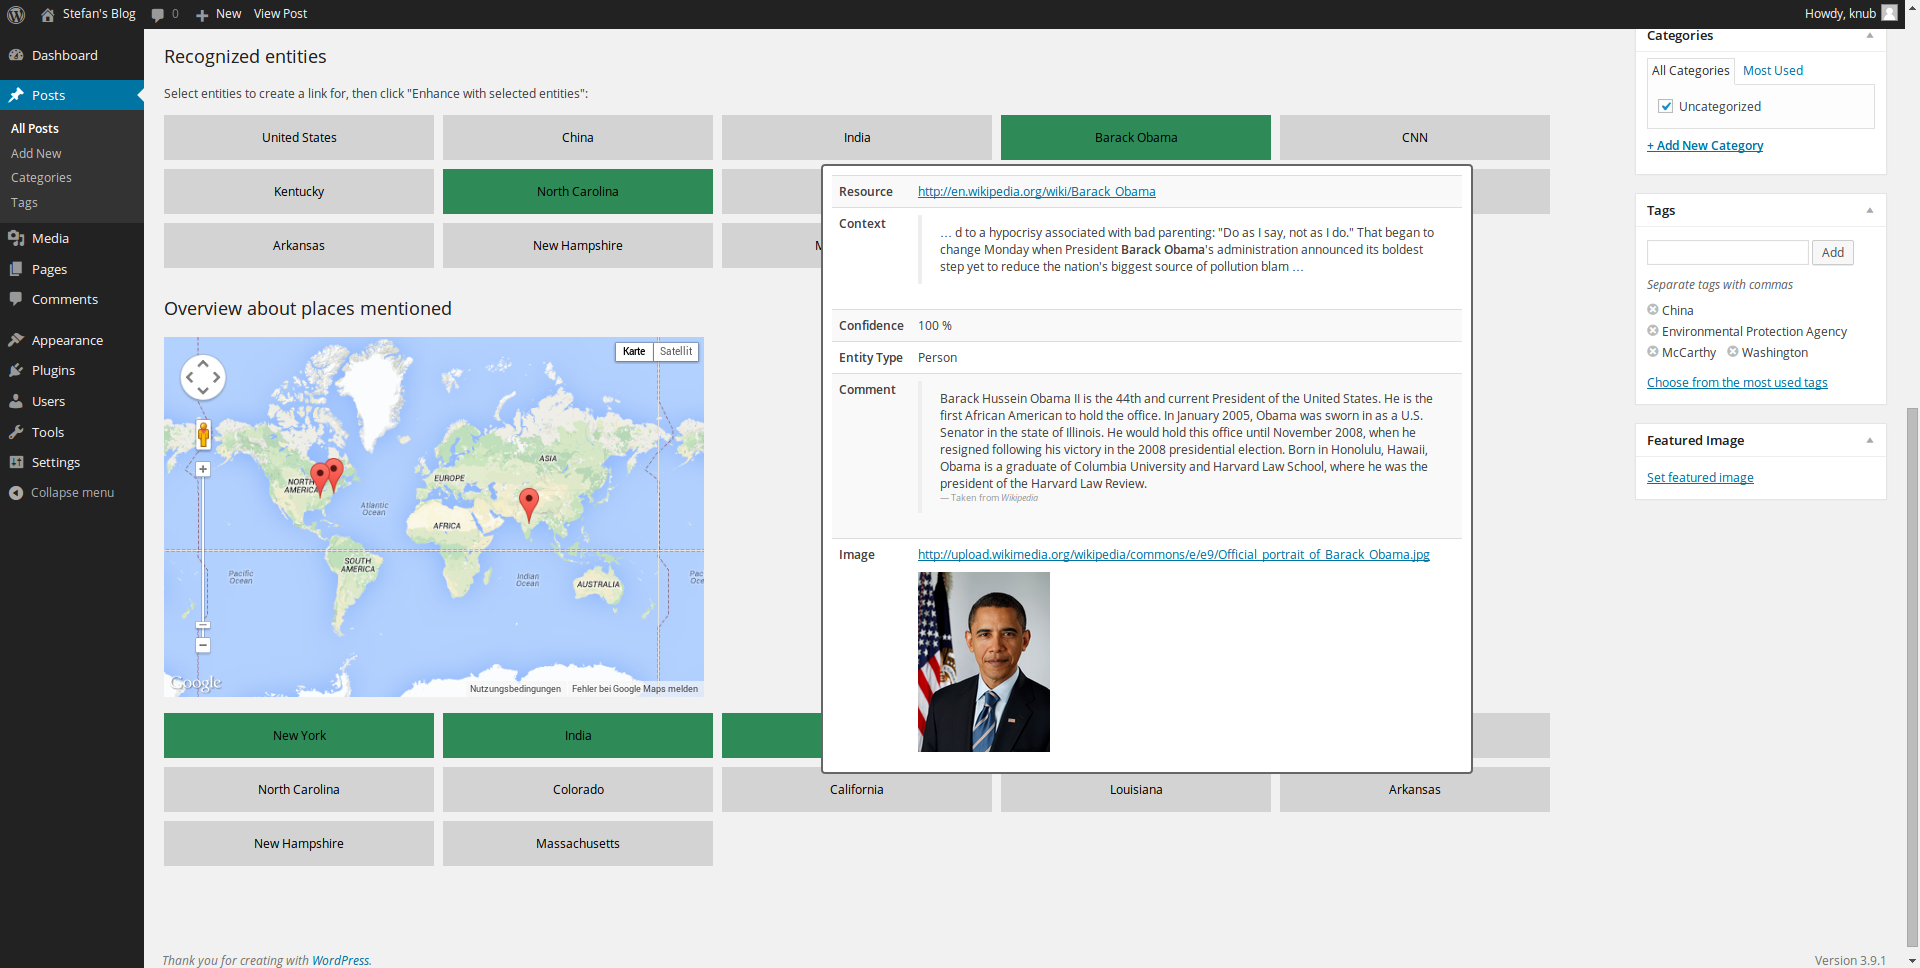 This shows the selected entities to auto-link and auto-tag (North Carolina and Barack Obama), the infobx with detailed information about Barack Obama, and the auto-created map, which currently displays New York, India, and some other state in the USA. Also note the tags on the right side, which have already been added.